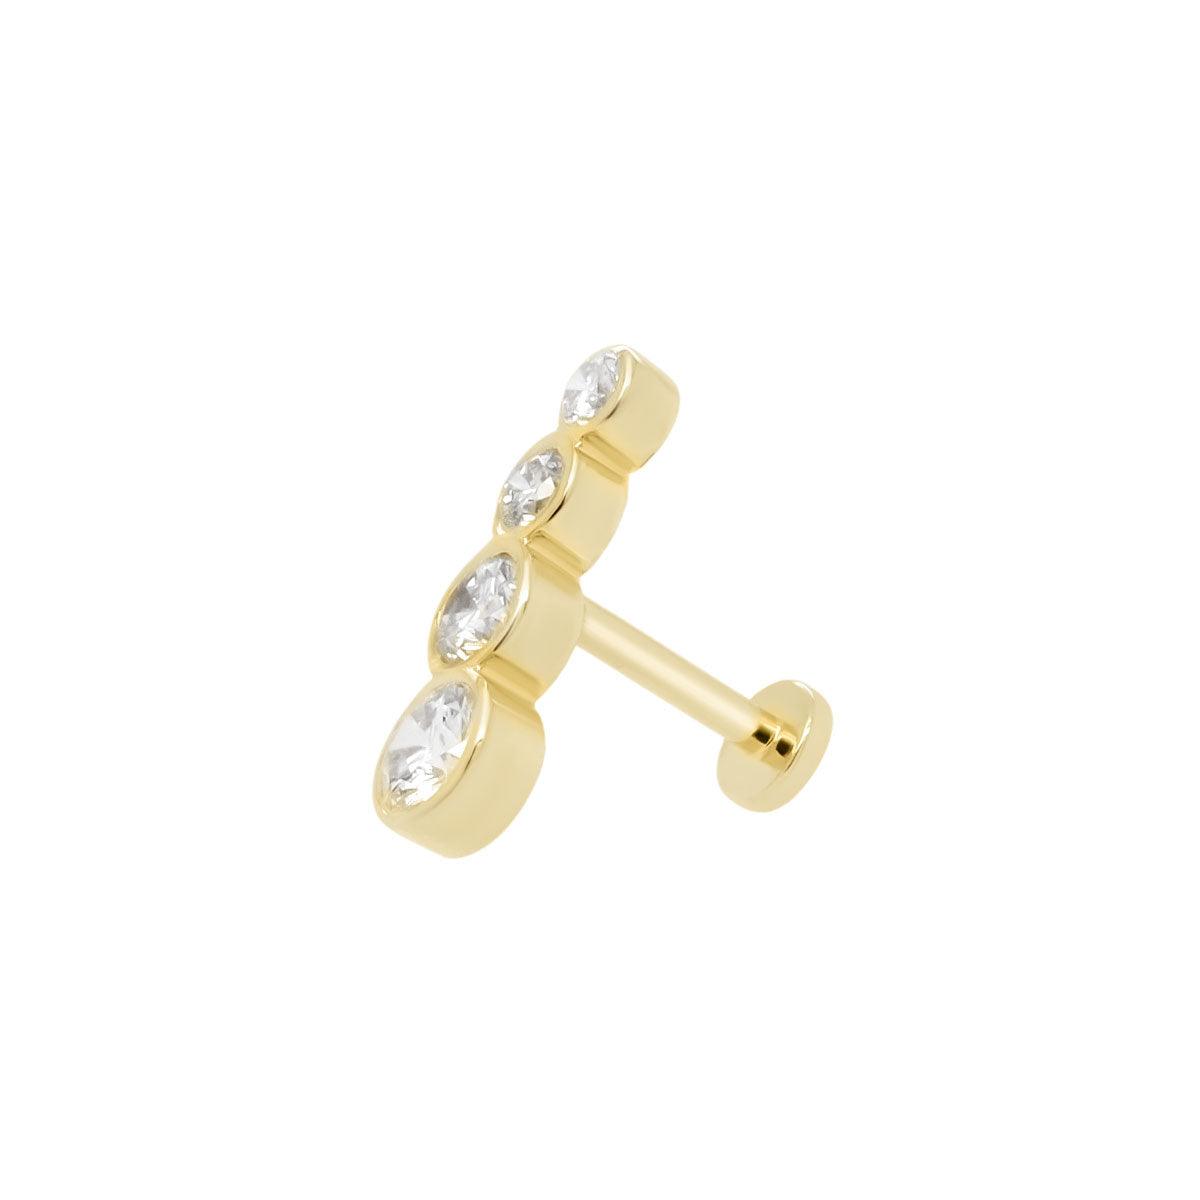 14K Gold Threaded Flat Back Earring Replacement in 5mm, 6.5mm, and 8mm Post Lengths, Yellow Gold / 6.5mm